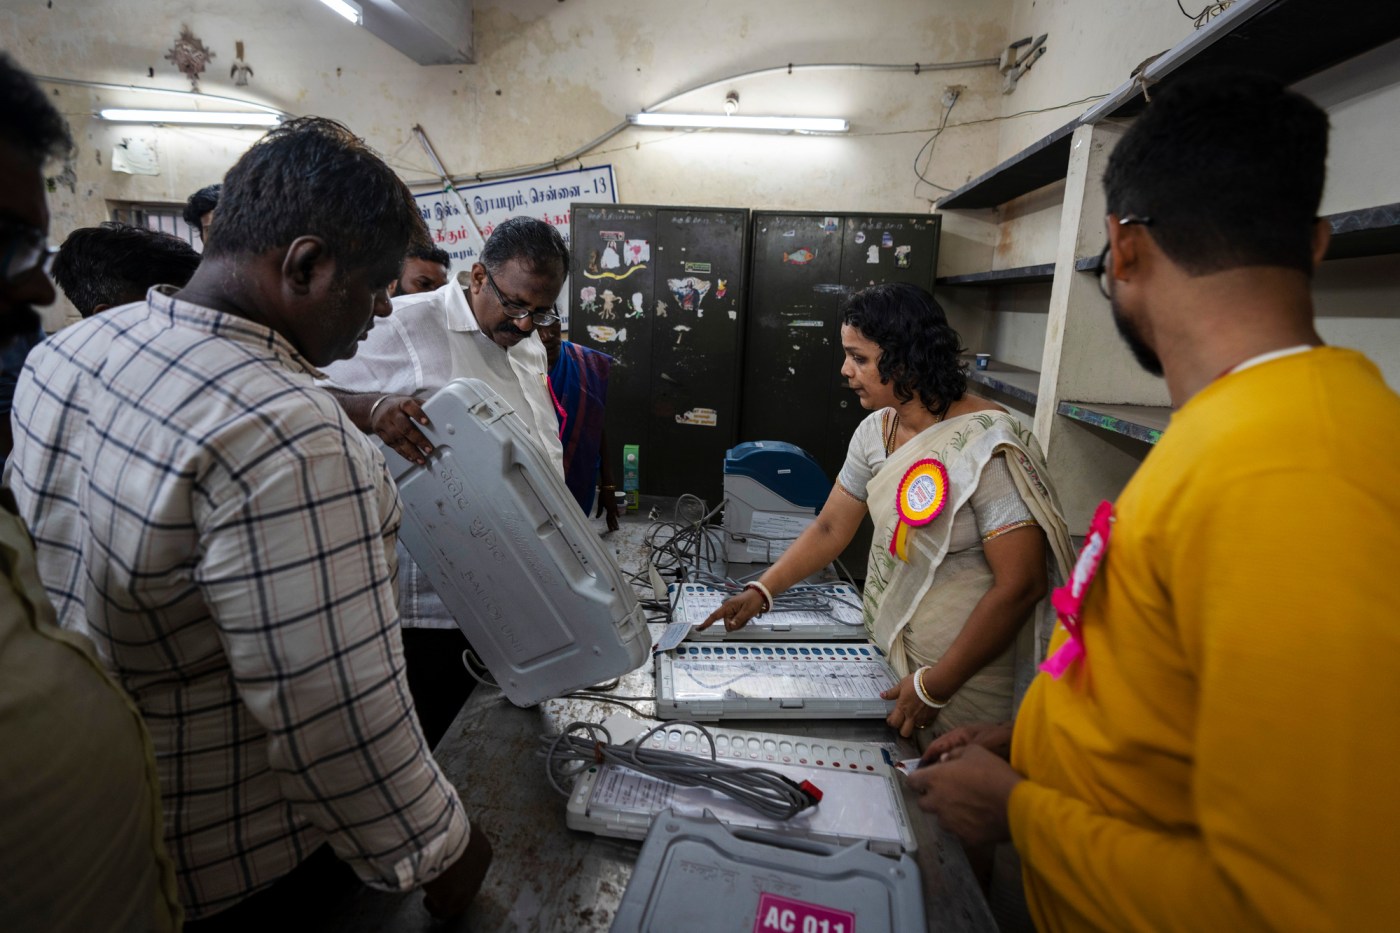 first-stage-of-world’s-largest-election-under-way-in-india